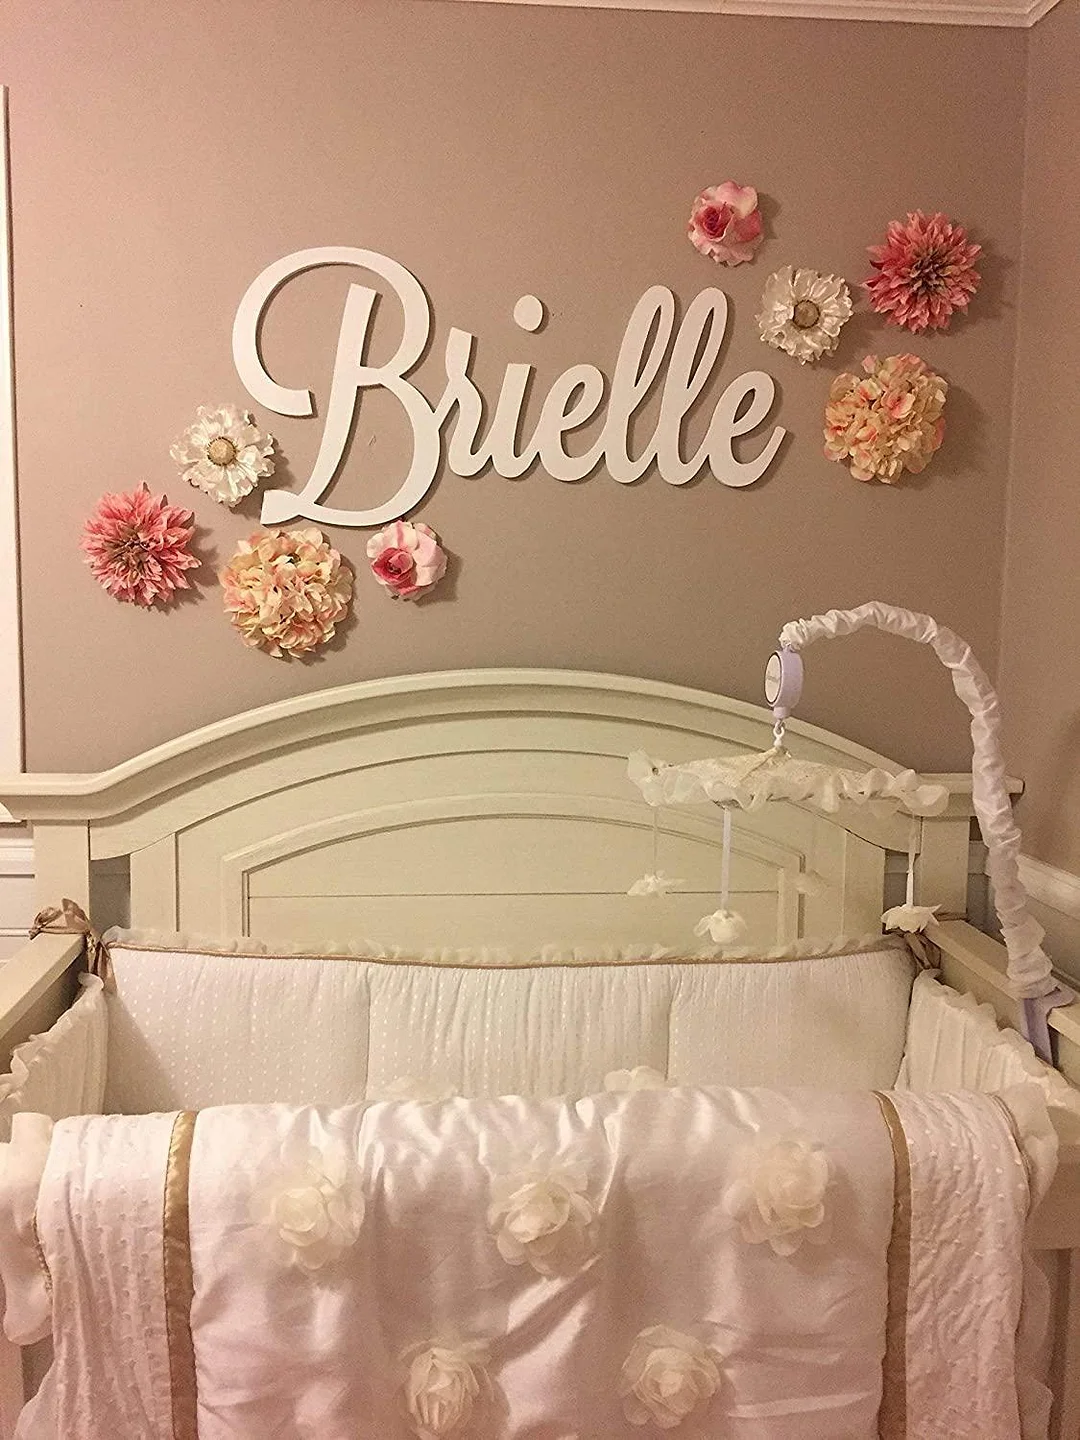 Personalized Wooden Name Sign Large size Letters Baby Name Plaque PAINTED nursery name nursery decor  wall art 1022-1